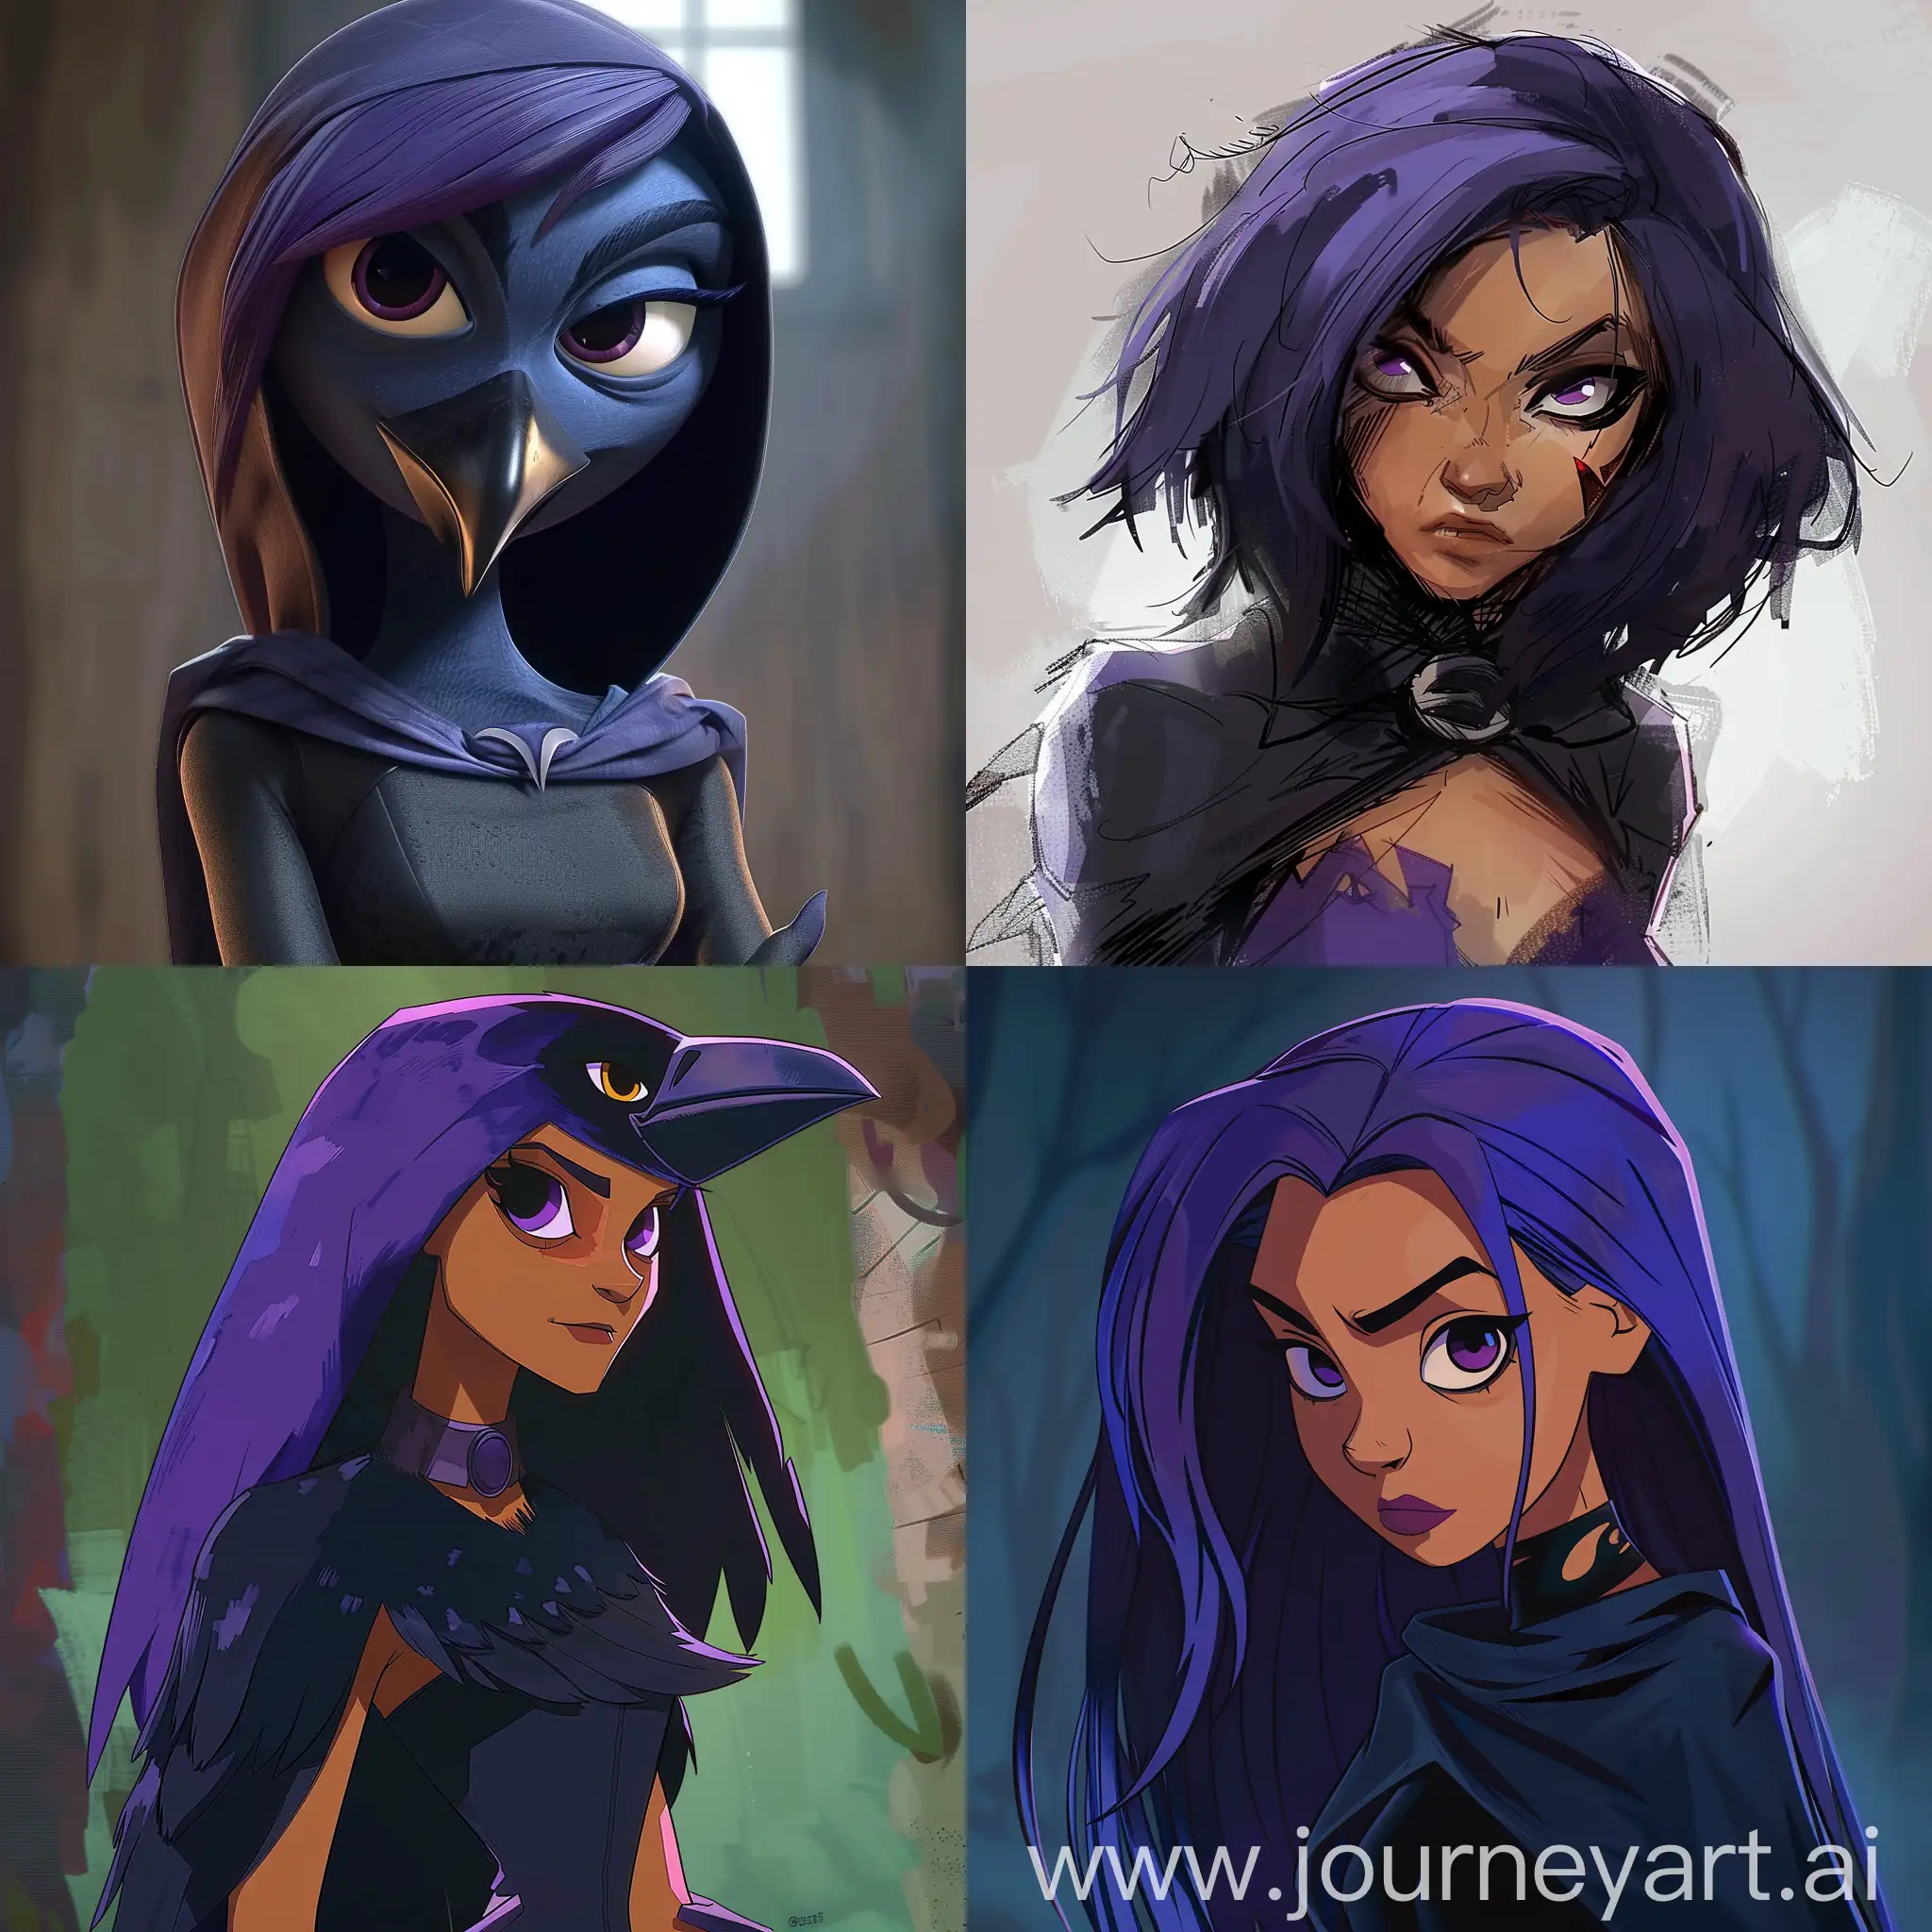 Raven from the cartoon teen titans from 2003 in pixar style